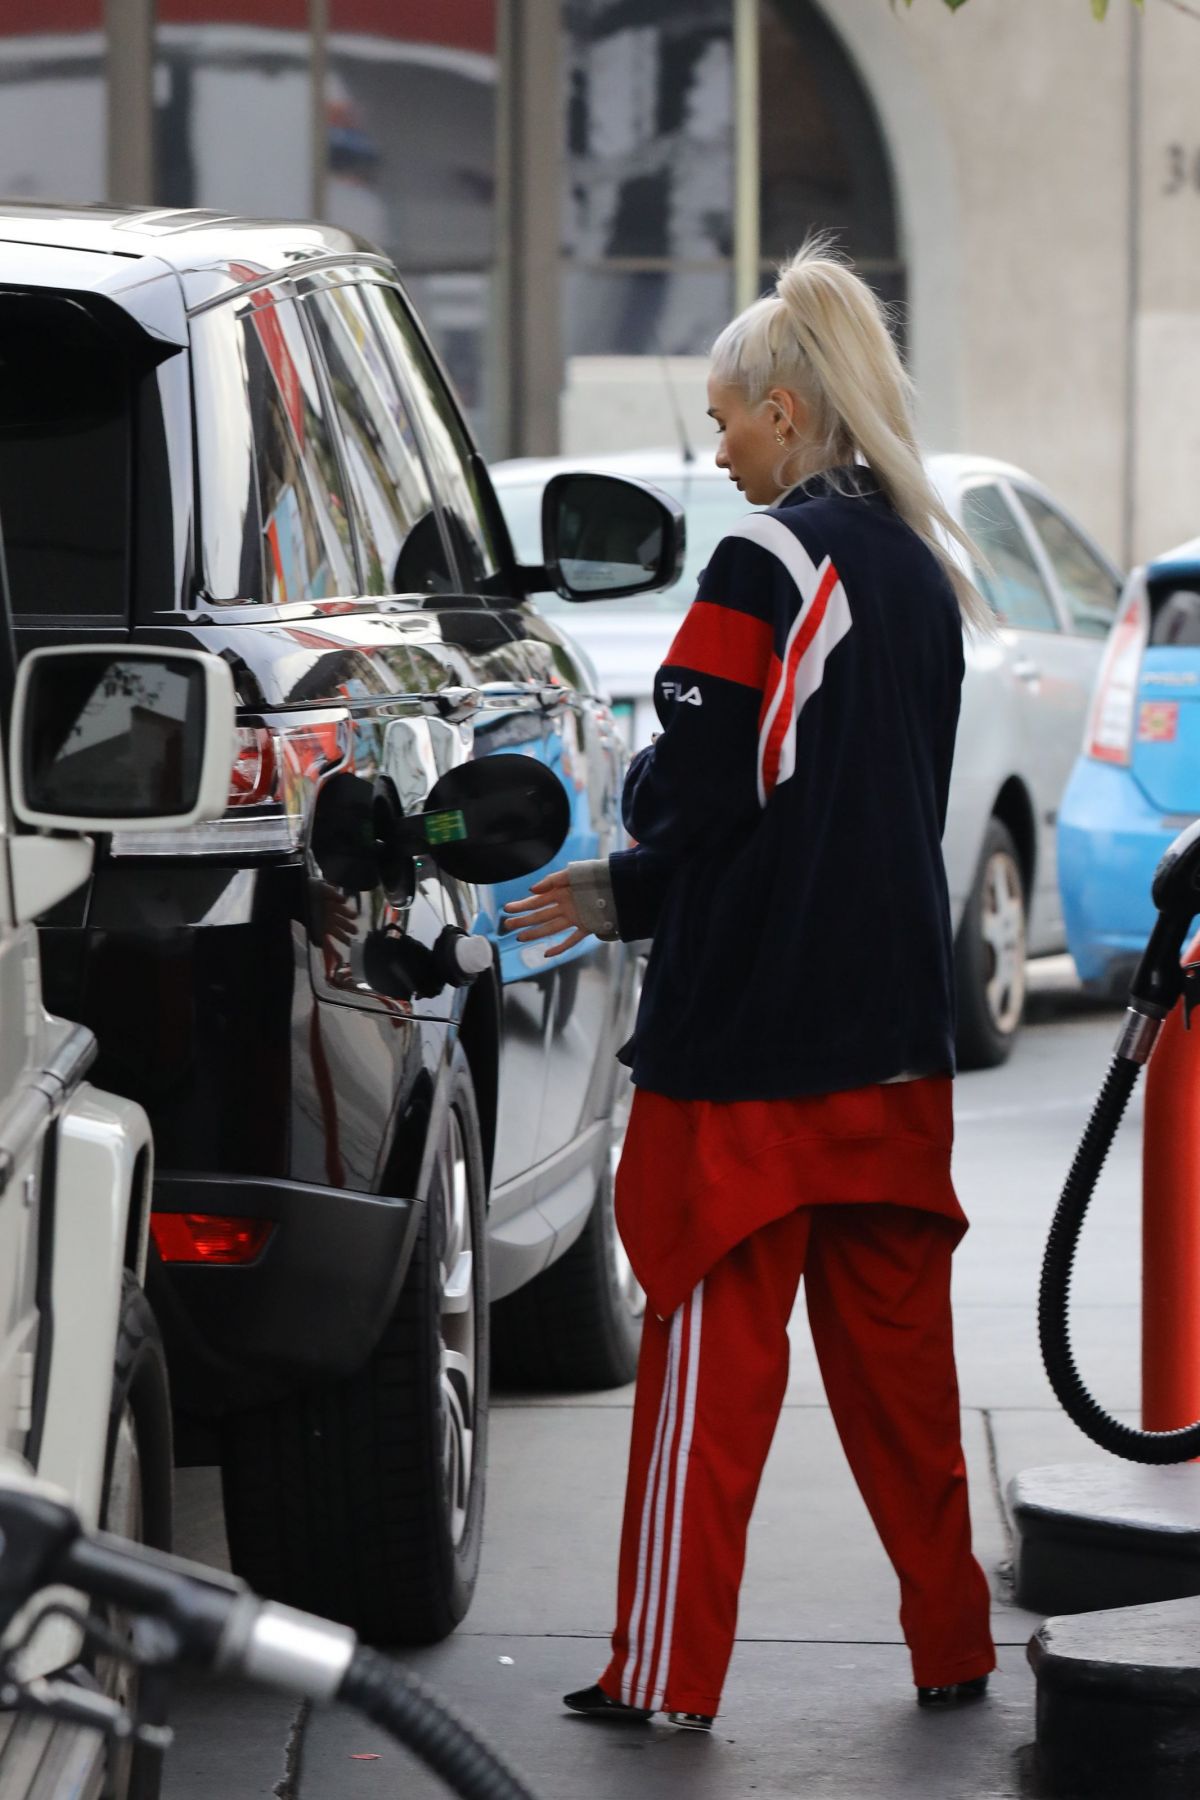 PIA MIA PEREZ at a Gas Station in West Hollywood 01/03/2017 – HawtCelebs